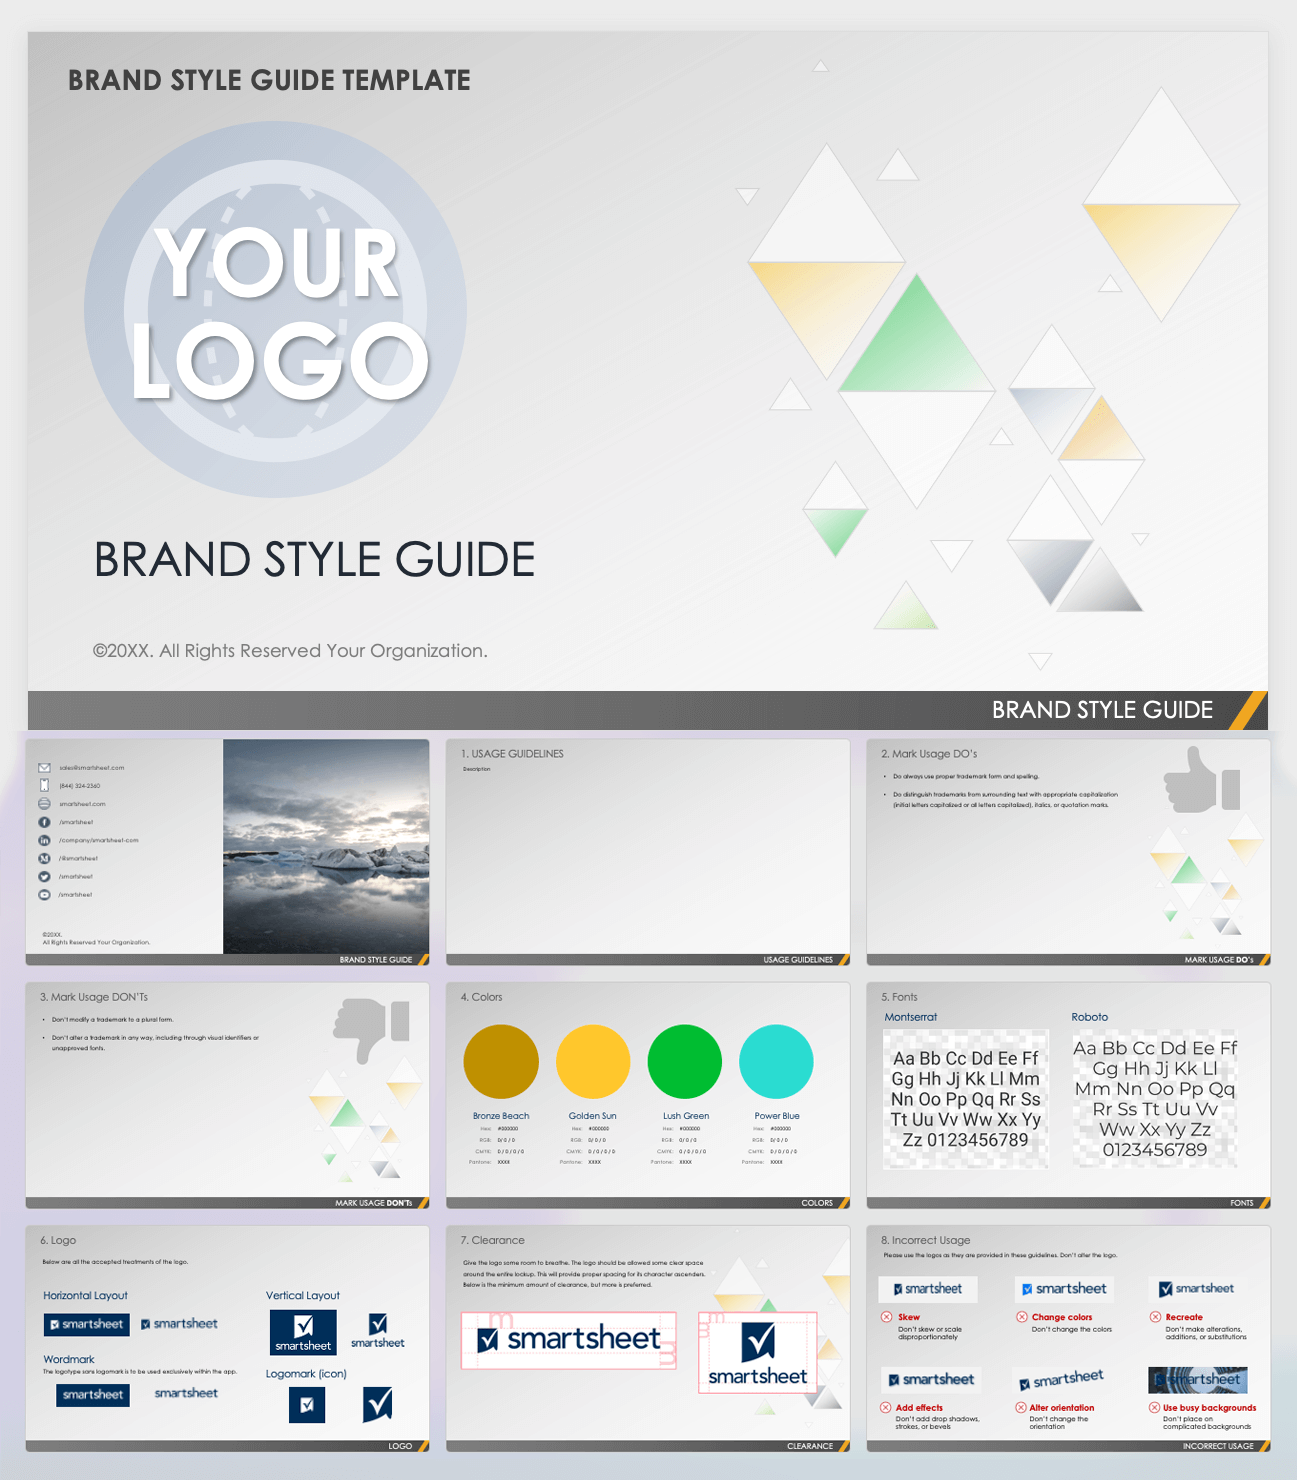 Brand Style Guide Template PowerPoint